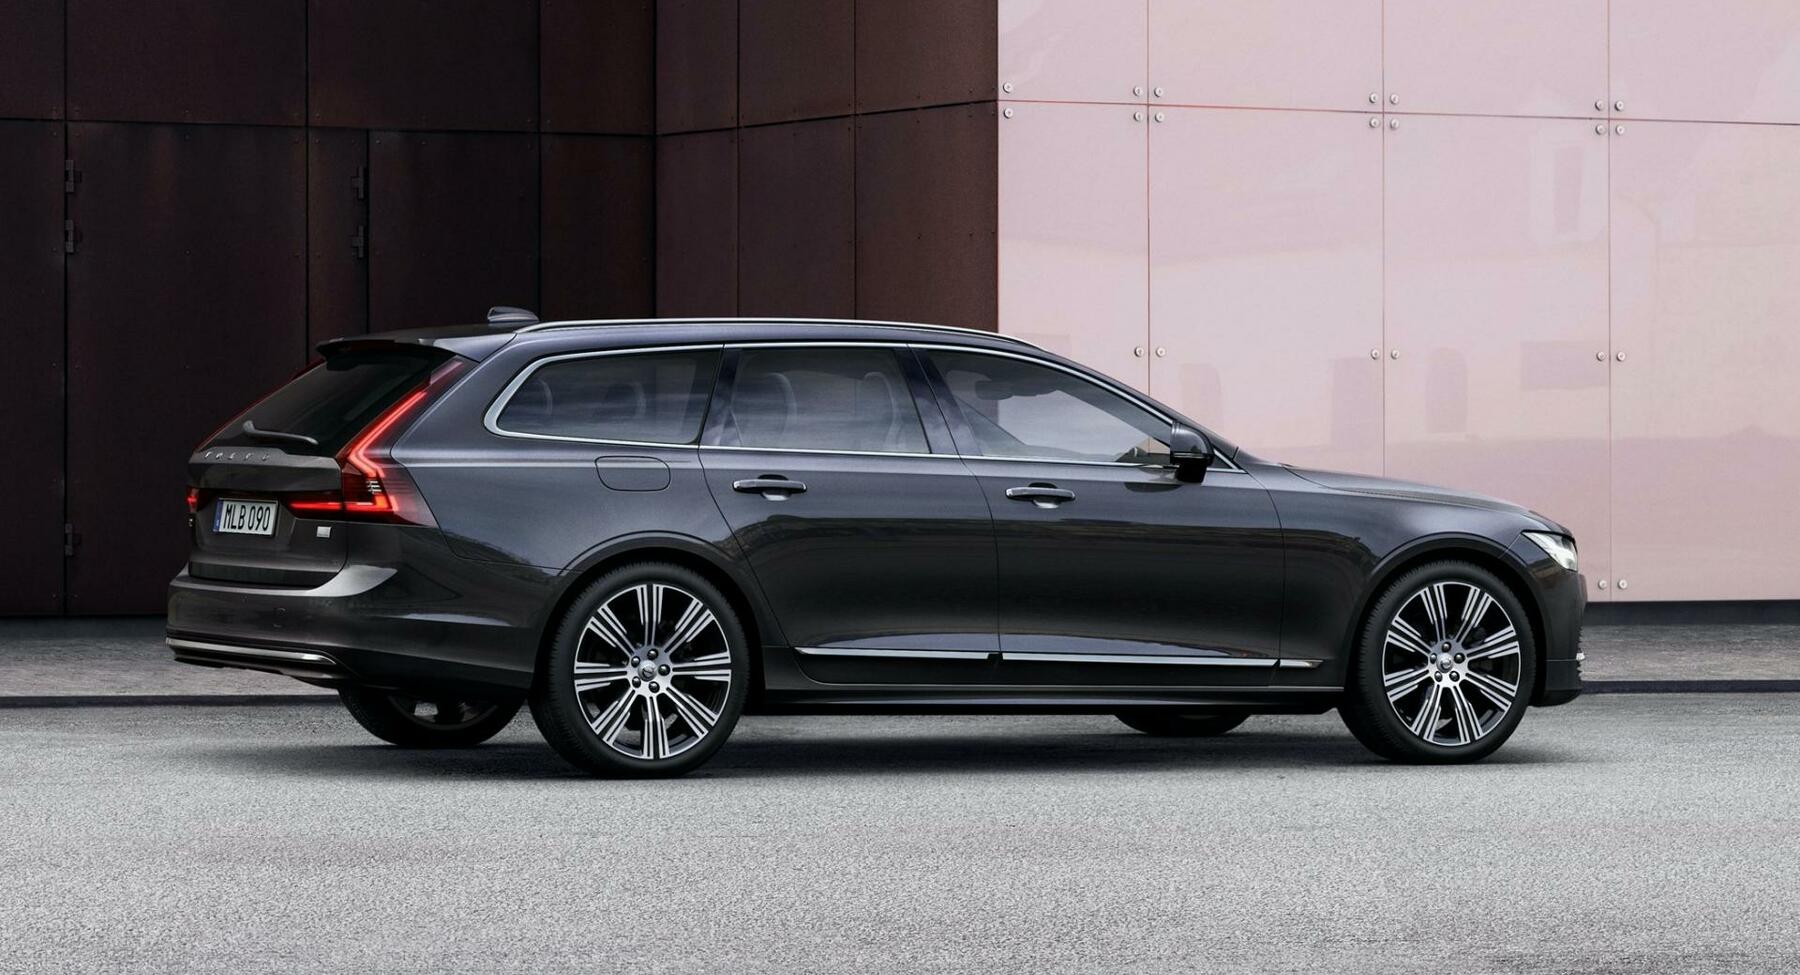 Volvo V90 Cross Country 2.0 T5 (250 Hp) AWD Automatic 2018, 2019, 2020